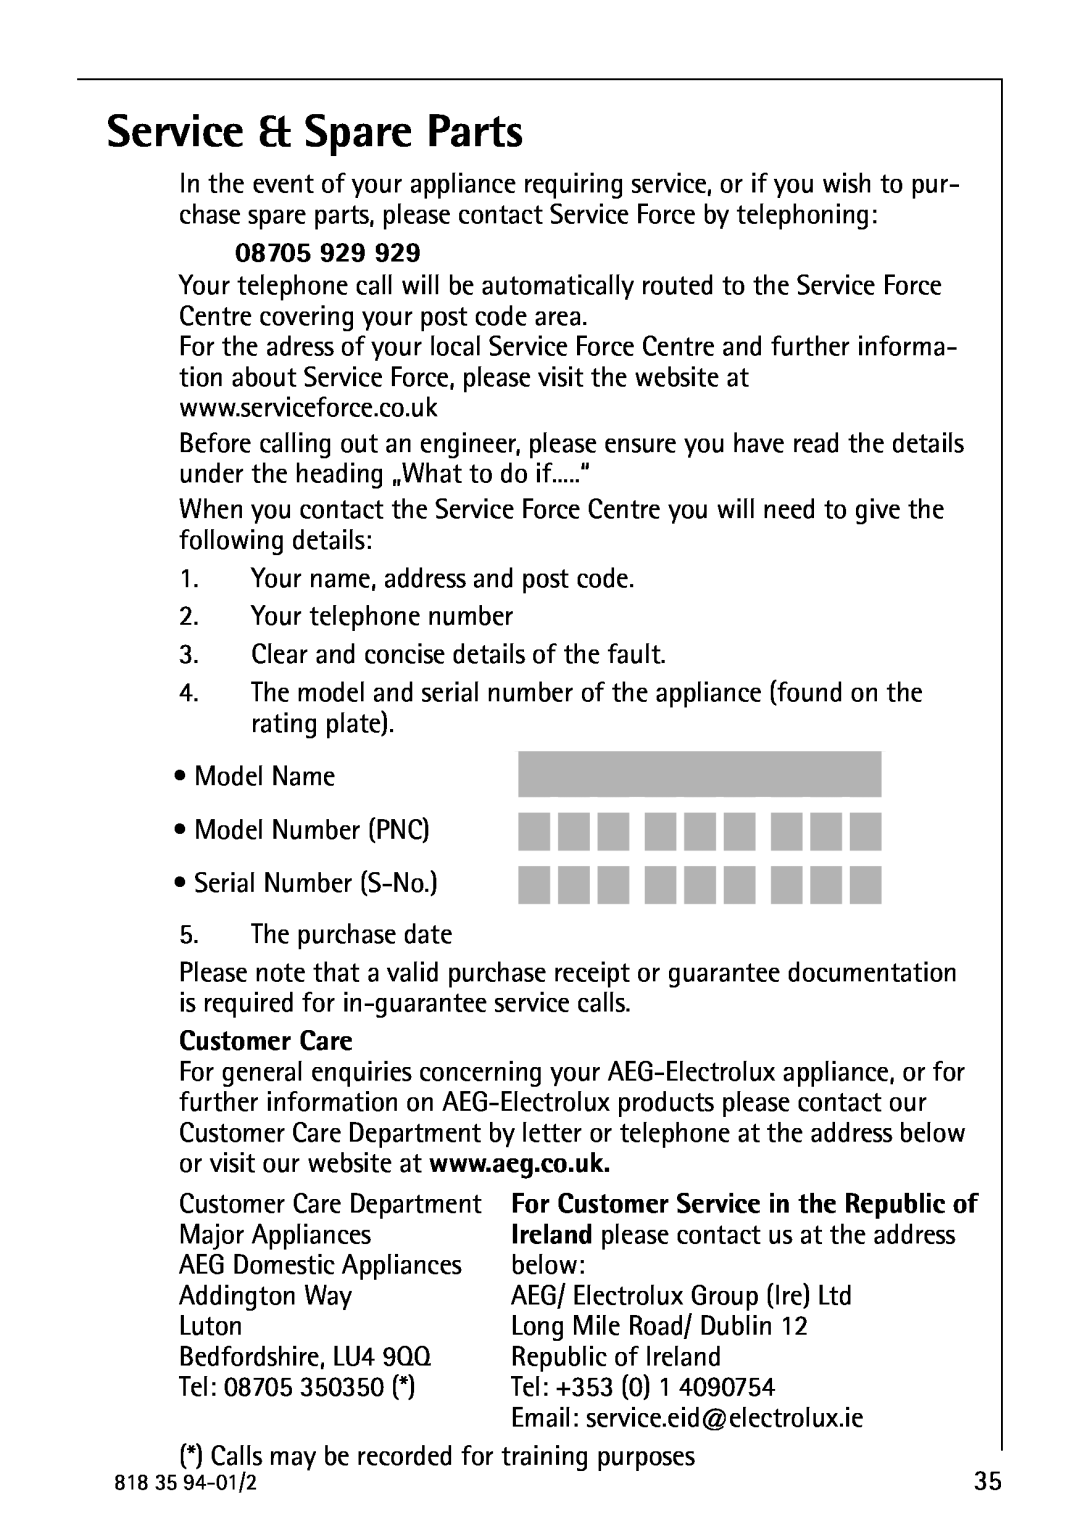 Electrolux U31462 operating instructions Service & Spare Parts, 08705 929, Customer Care 